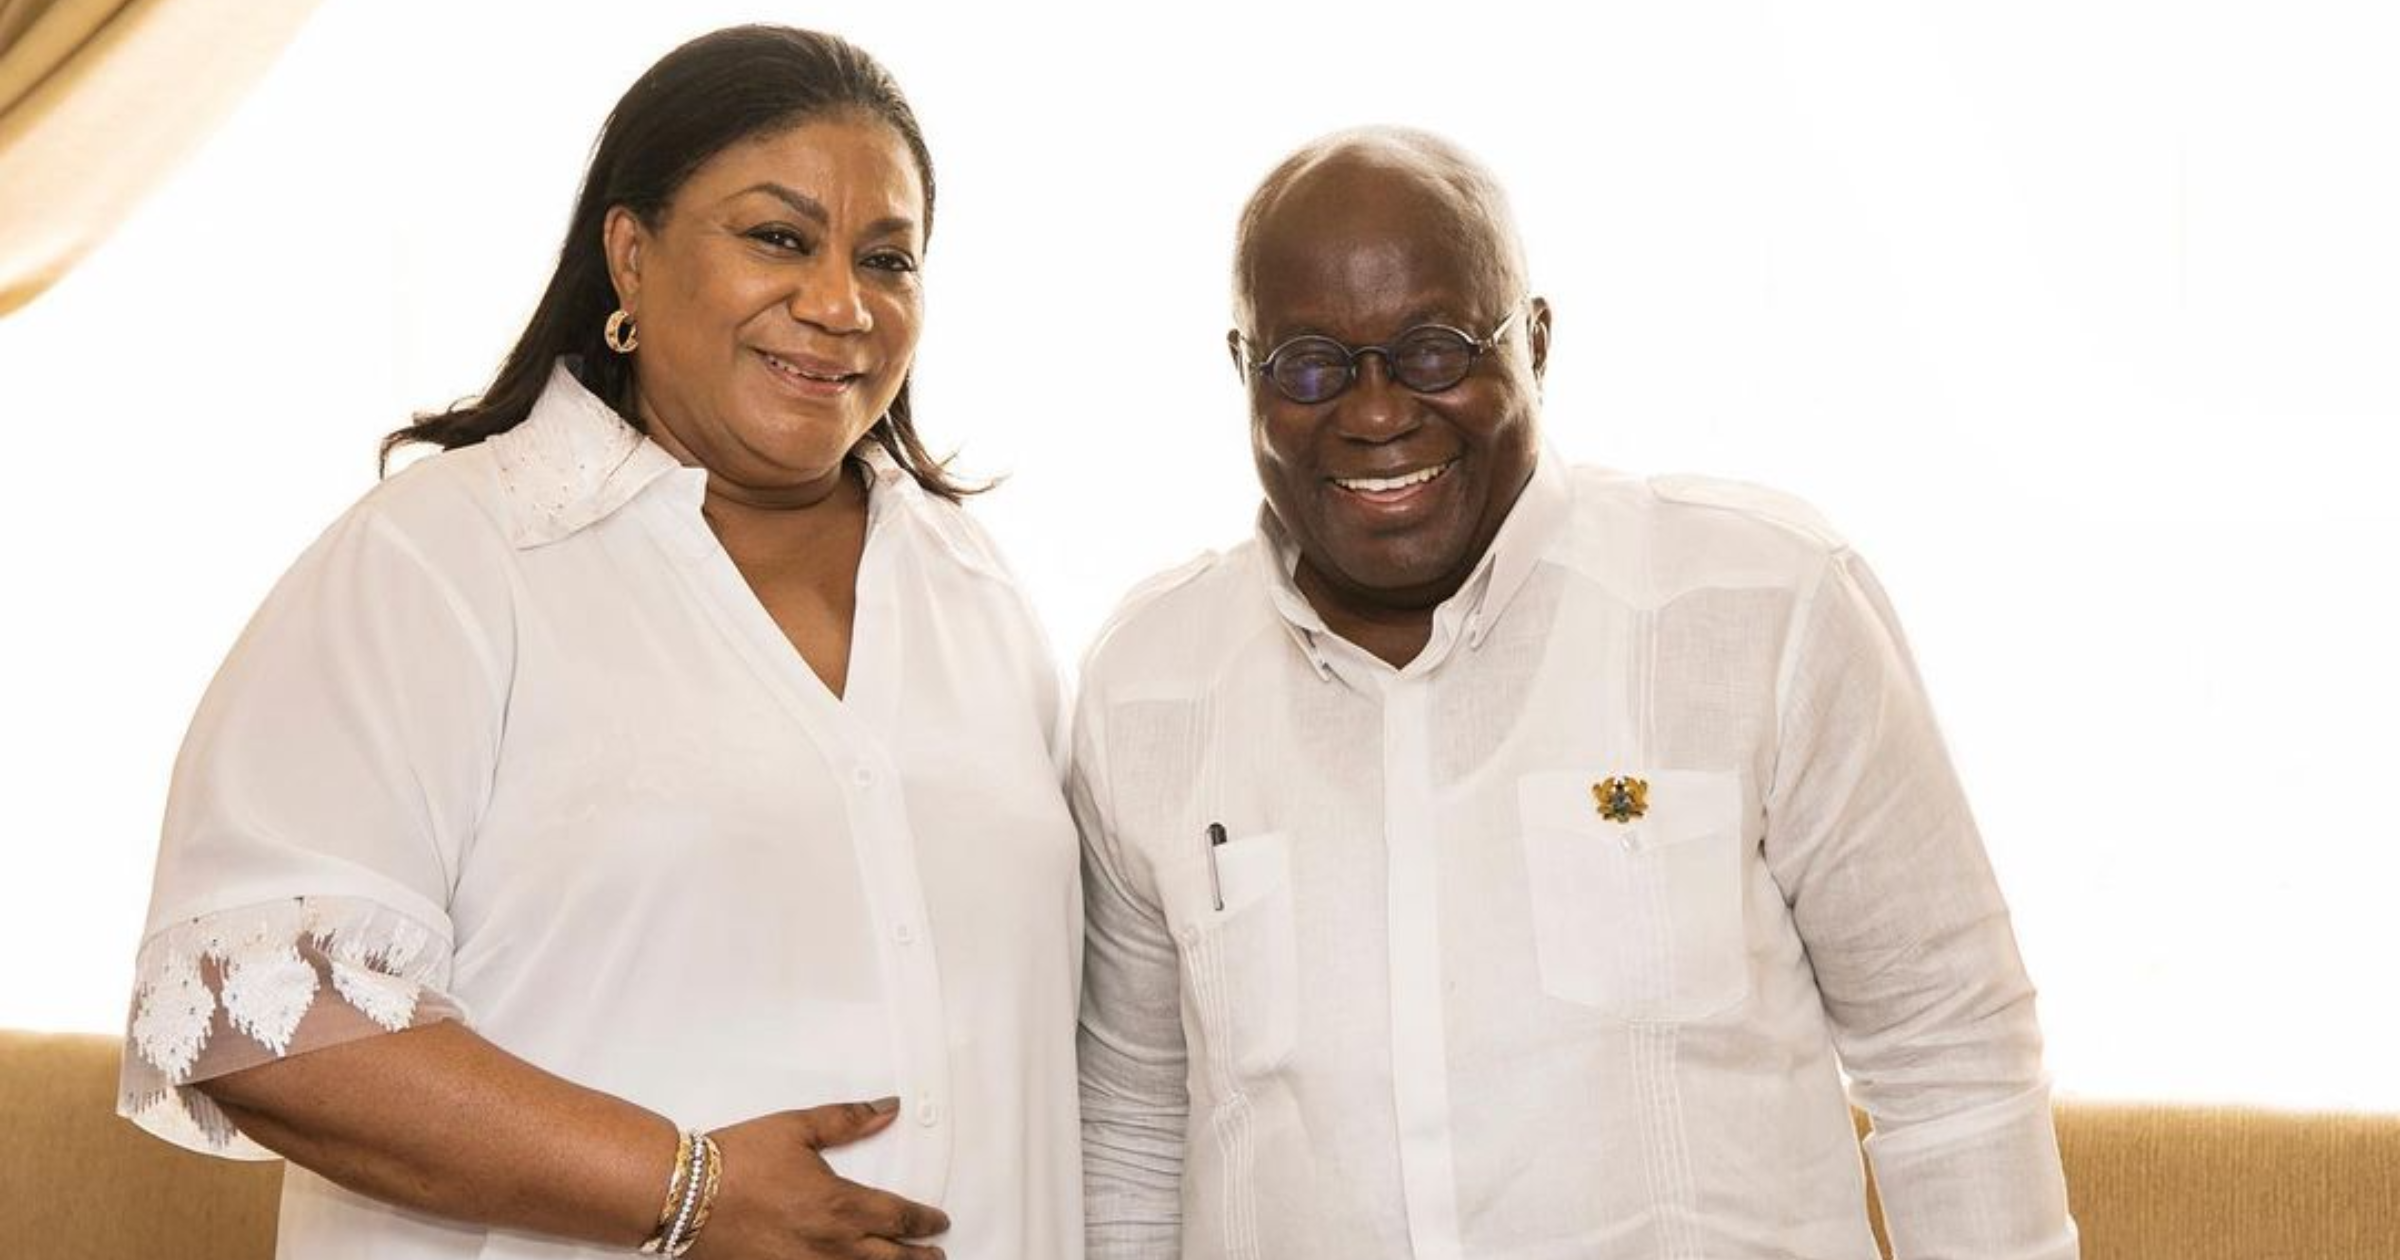 Akufo-Addo's wife Rebecca says a prayer for him ahead of December 7 elections